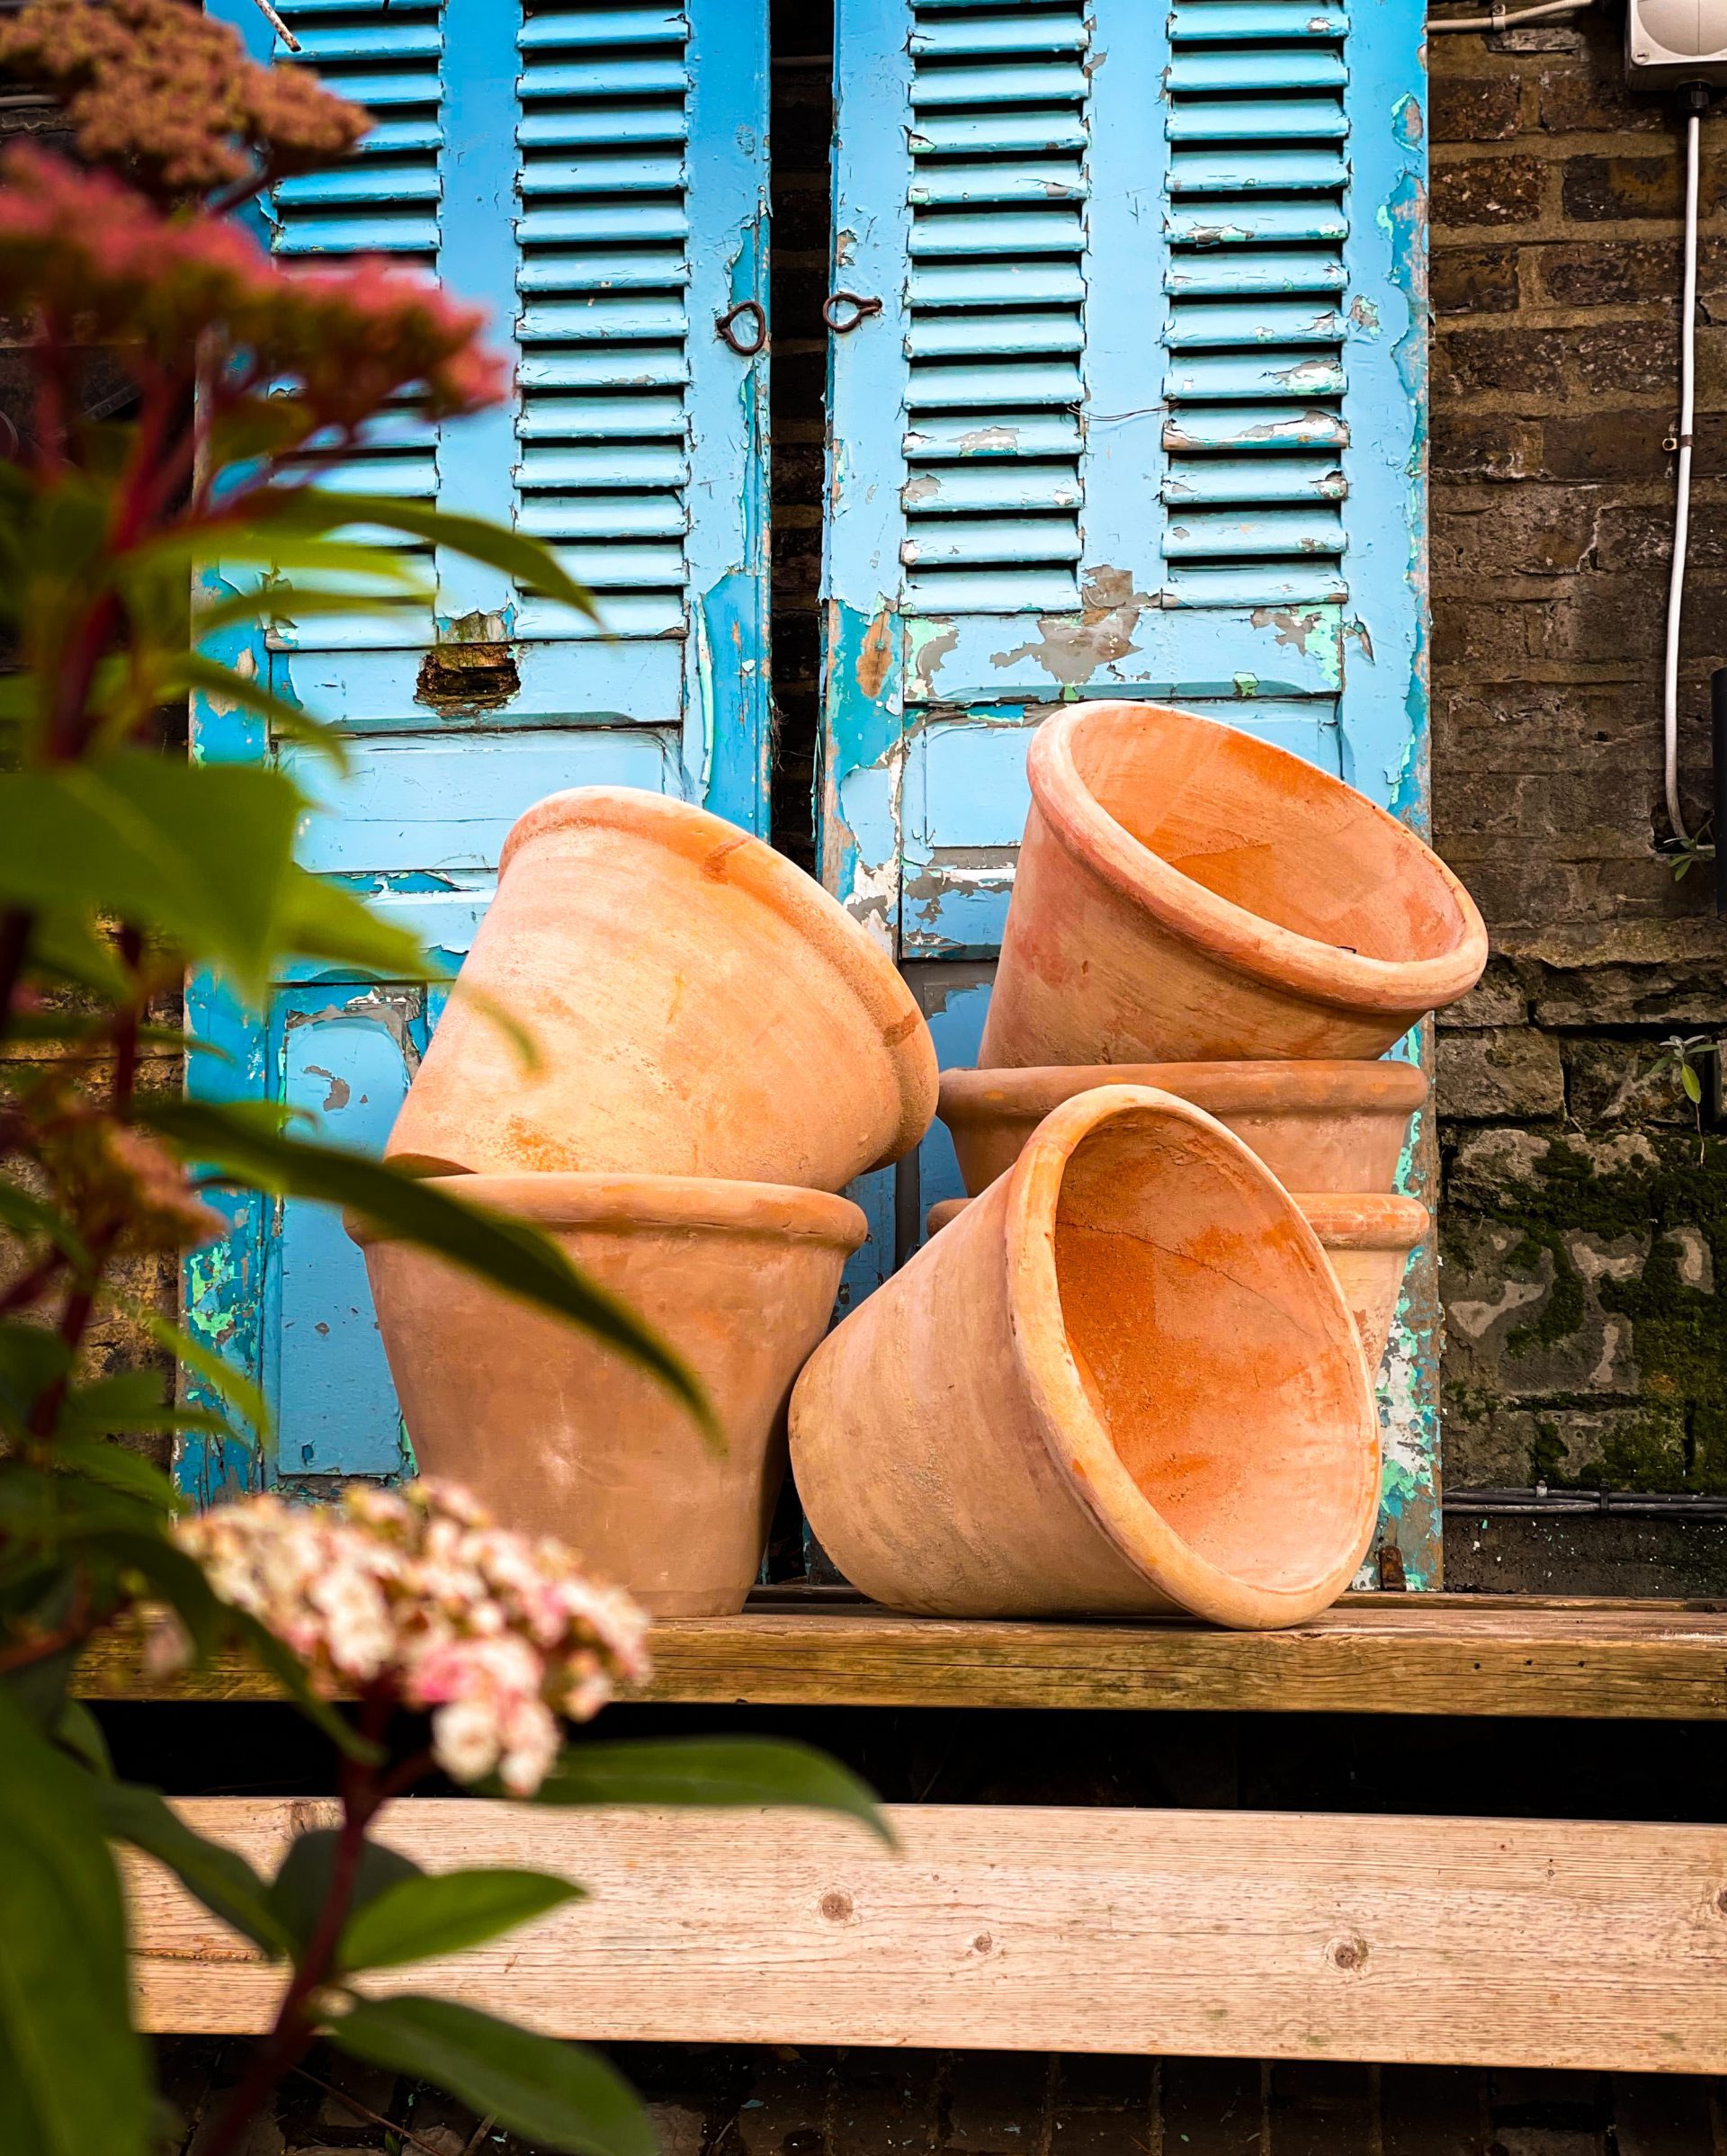 Terracotta pots in frong of a brick wall with blue decoratove door